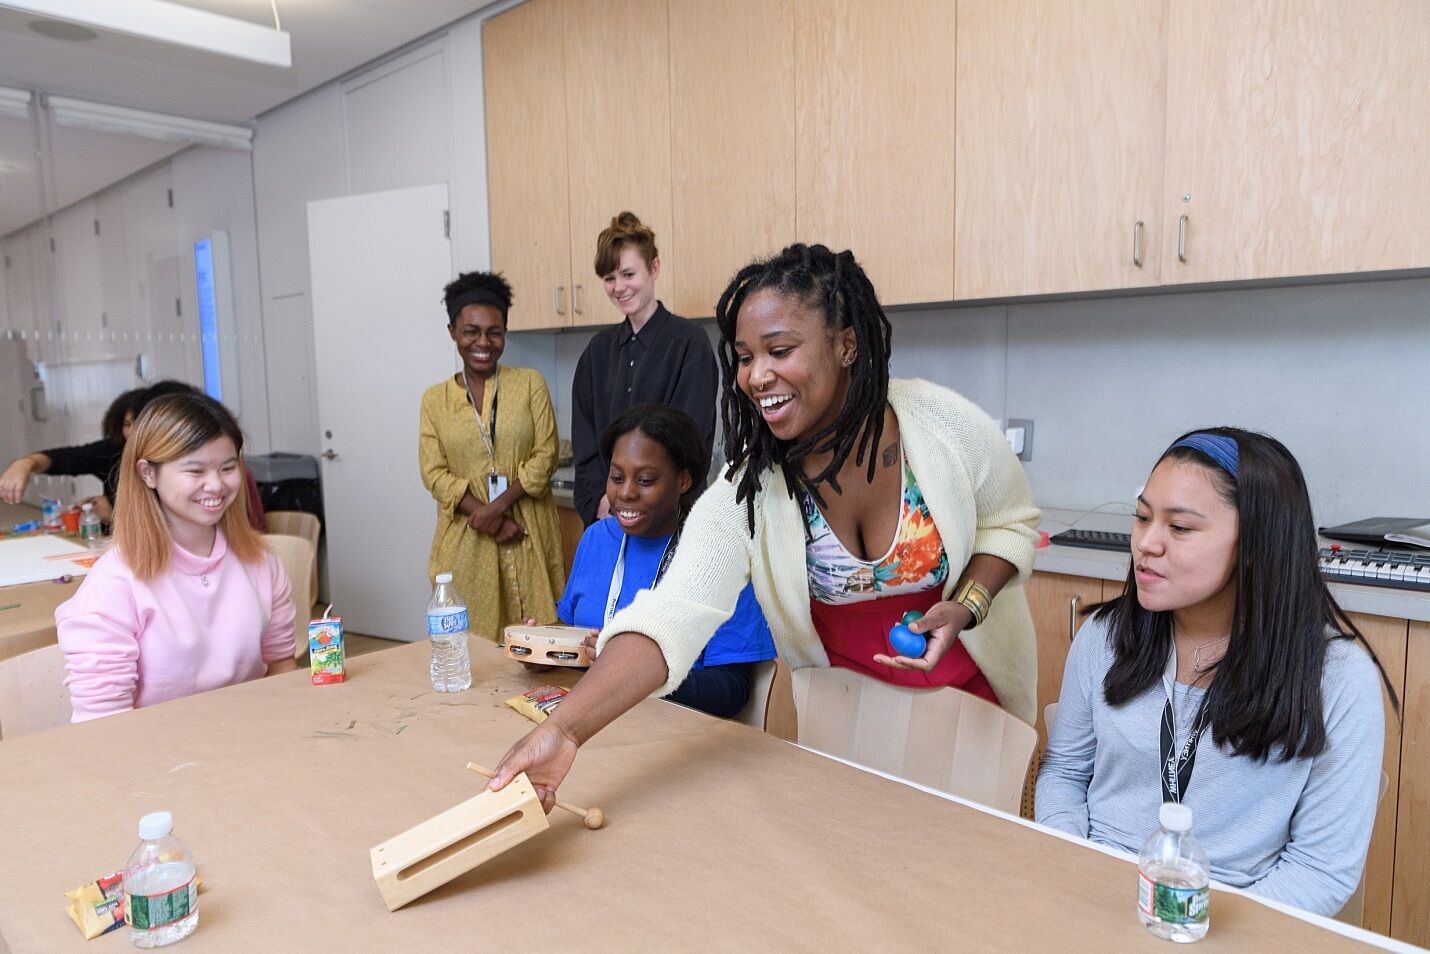 The artist places a wooden box on a table as students and staff members look on.